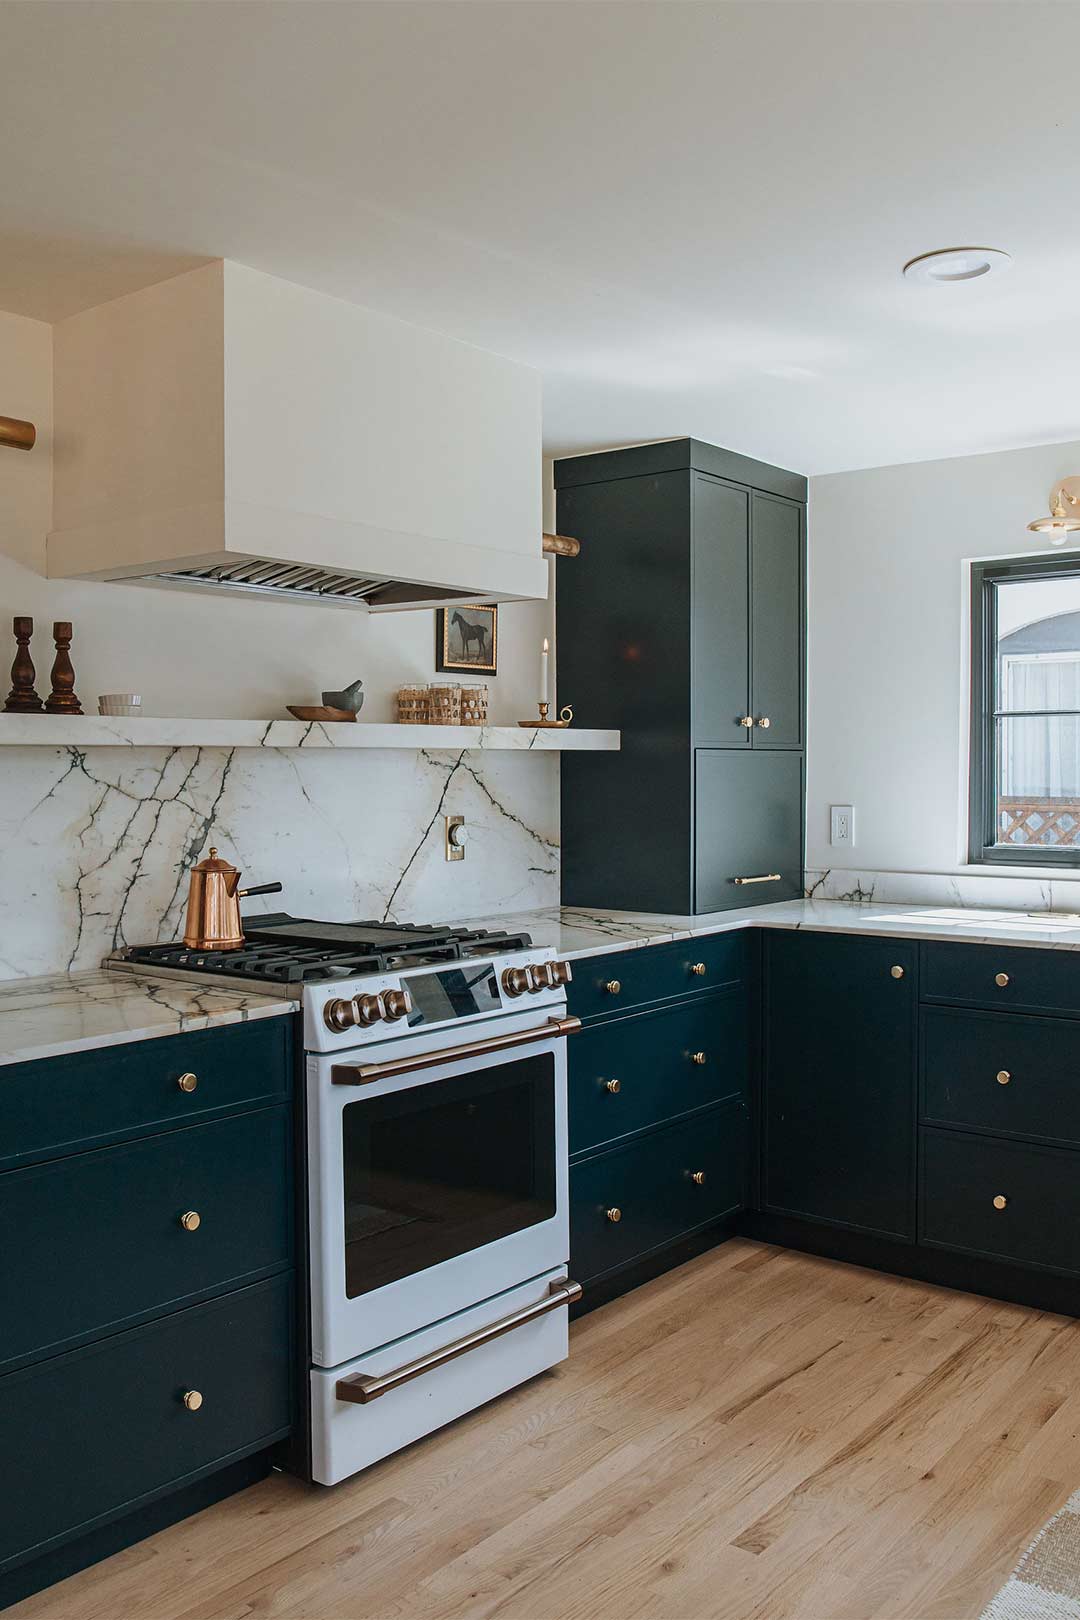 White oak flooring with dark blue cabinets with marble countertops and backsplash designed by Jennifer Murphy of J. Reiko Design + Co